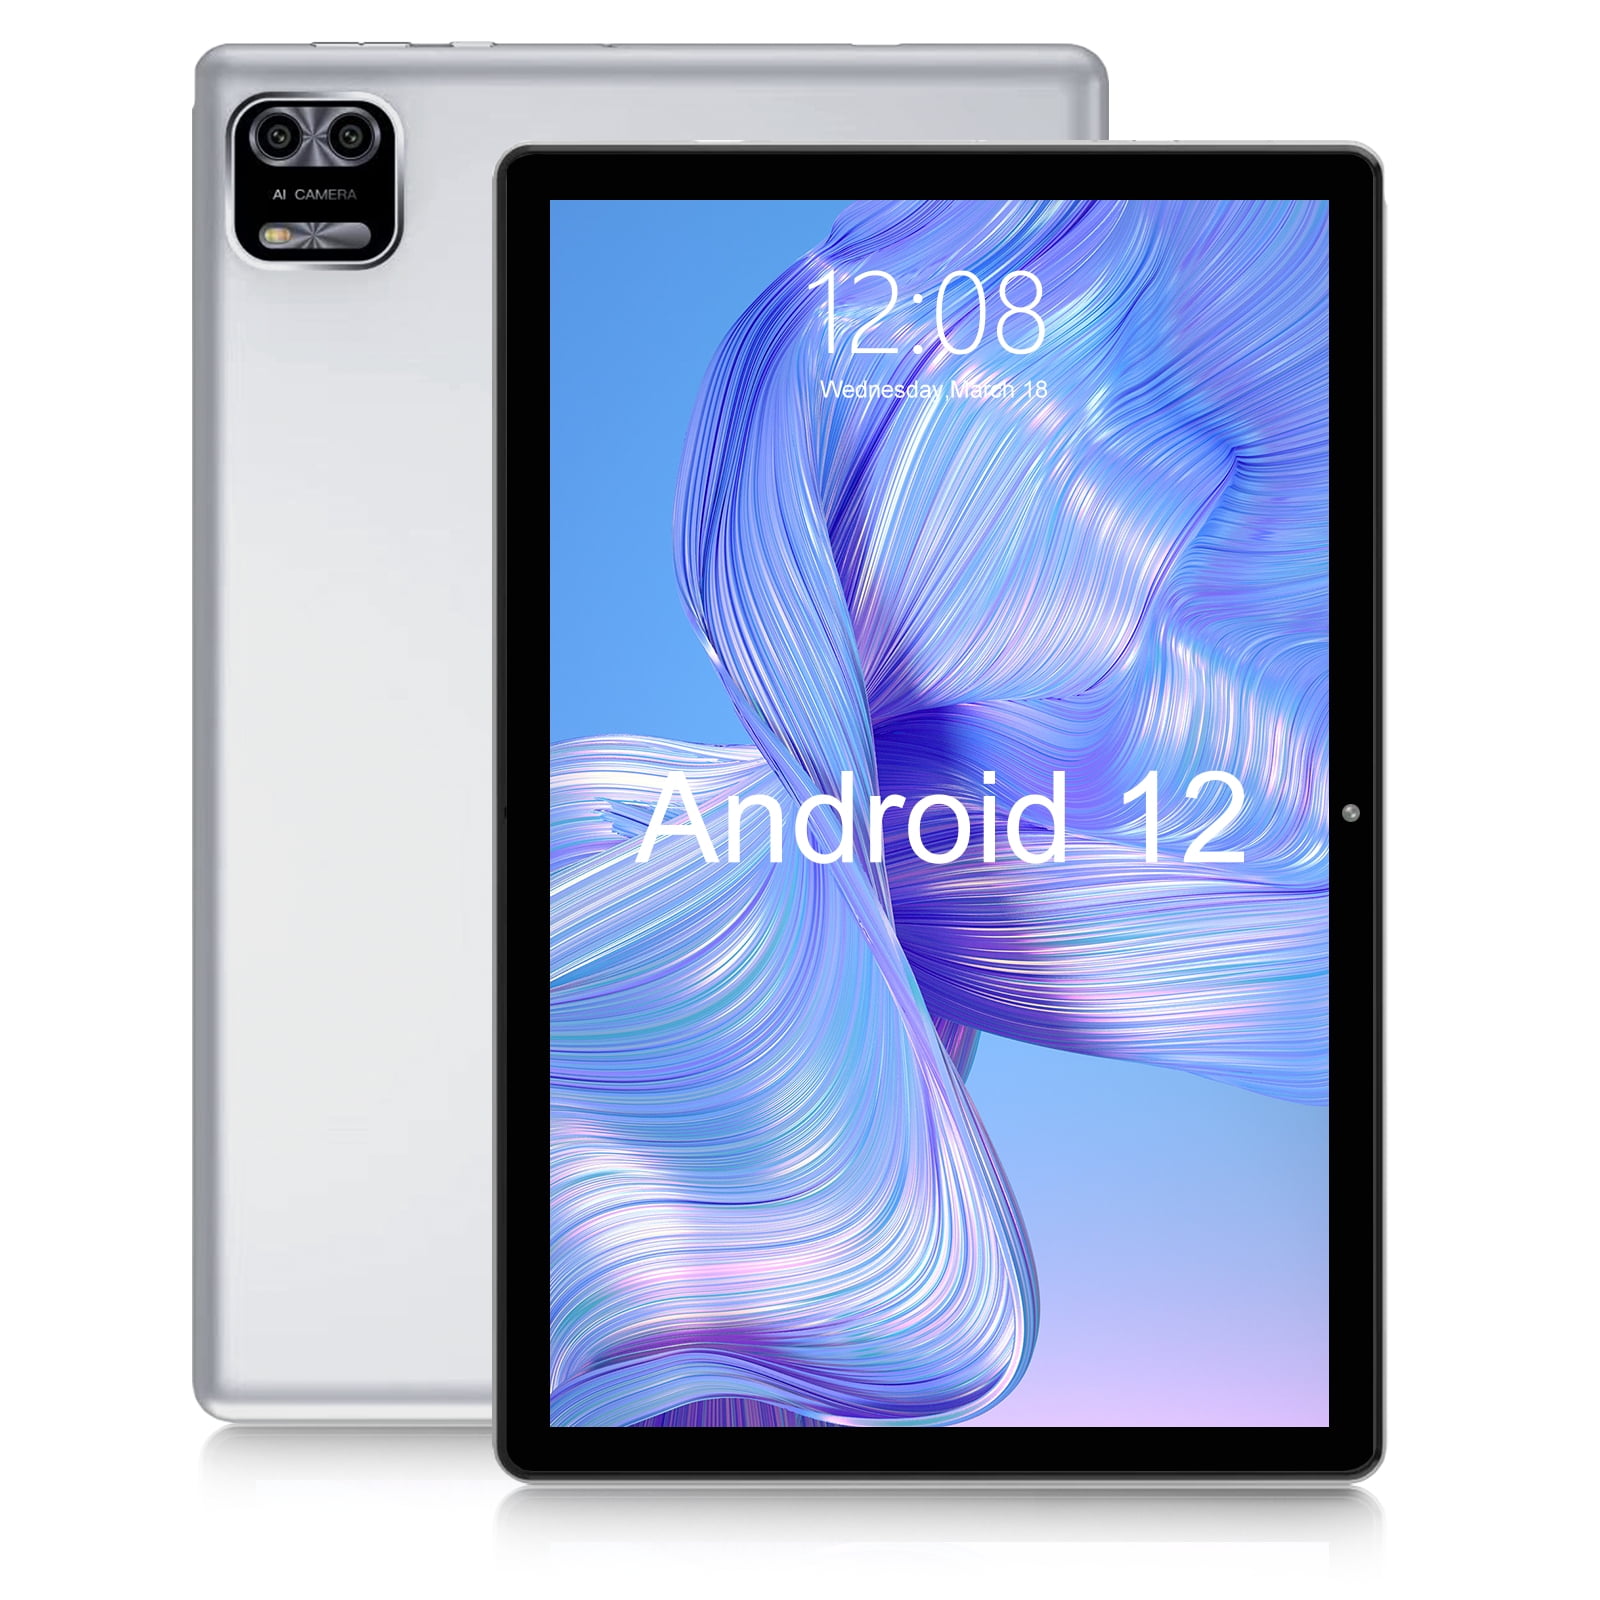 Android 12.0 Tablet 10 inch WeTap Y10,3GB RAM 64GB Storage,2MP+8MP